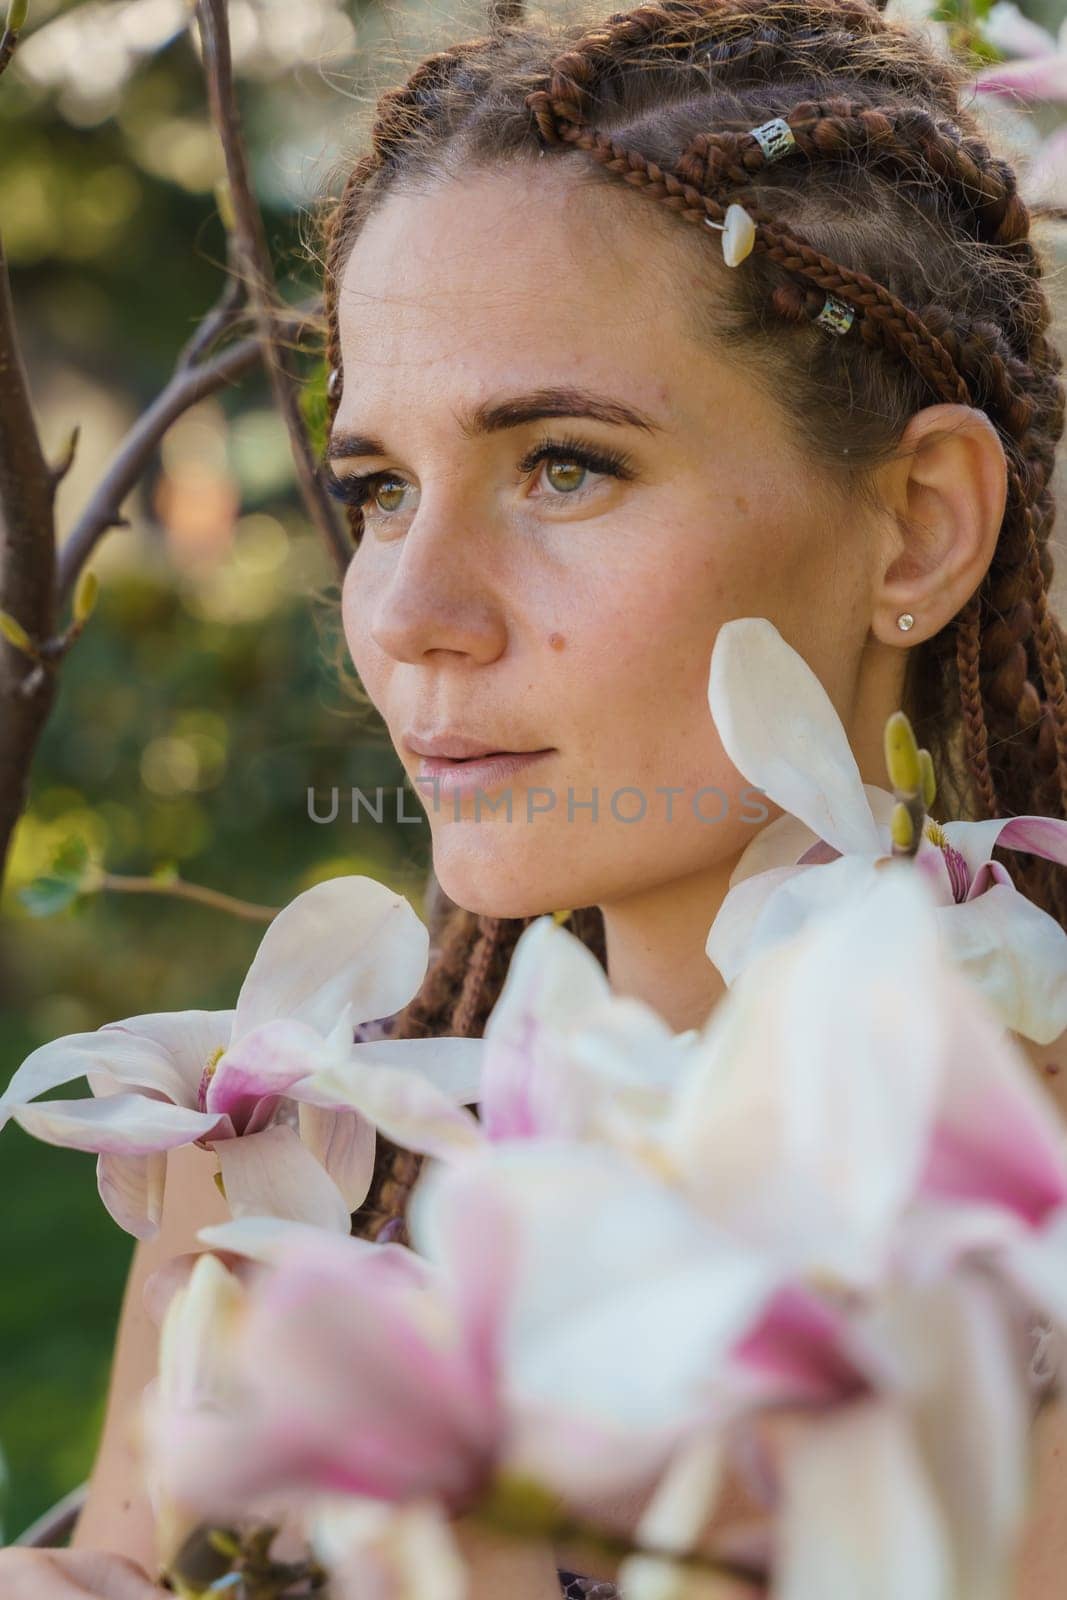 Magnolia flowers. Happy woman enjoys by blooming magnolia tree and sniffs it flowers with closed eyes in spring garden. Portrait